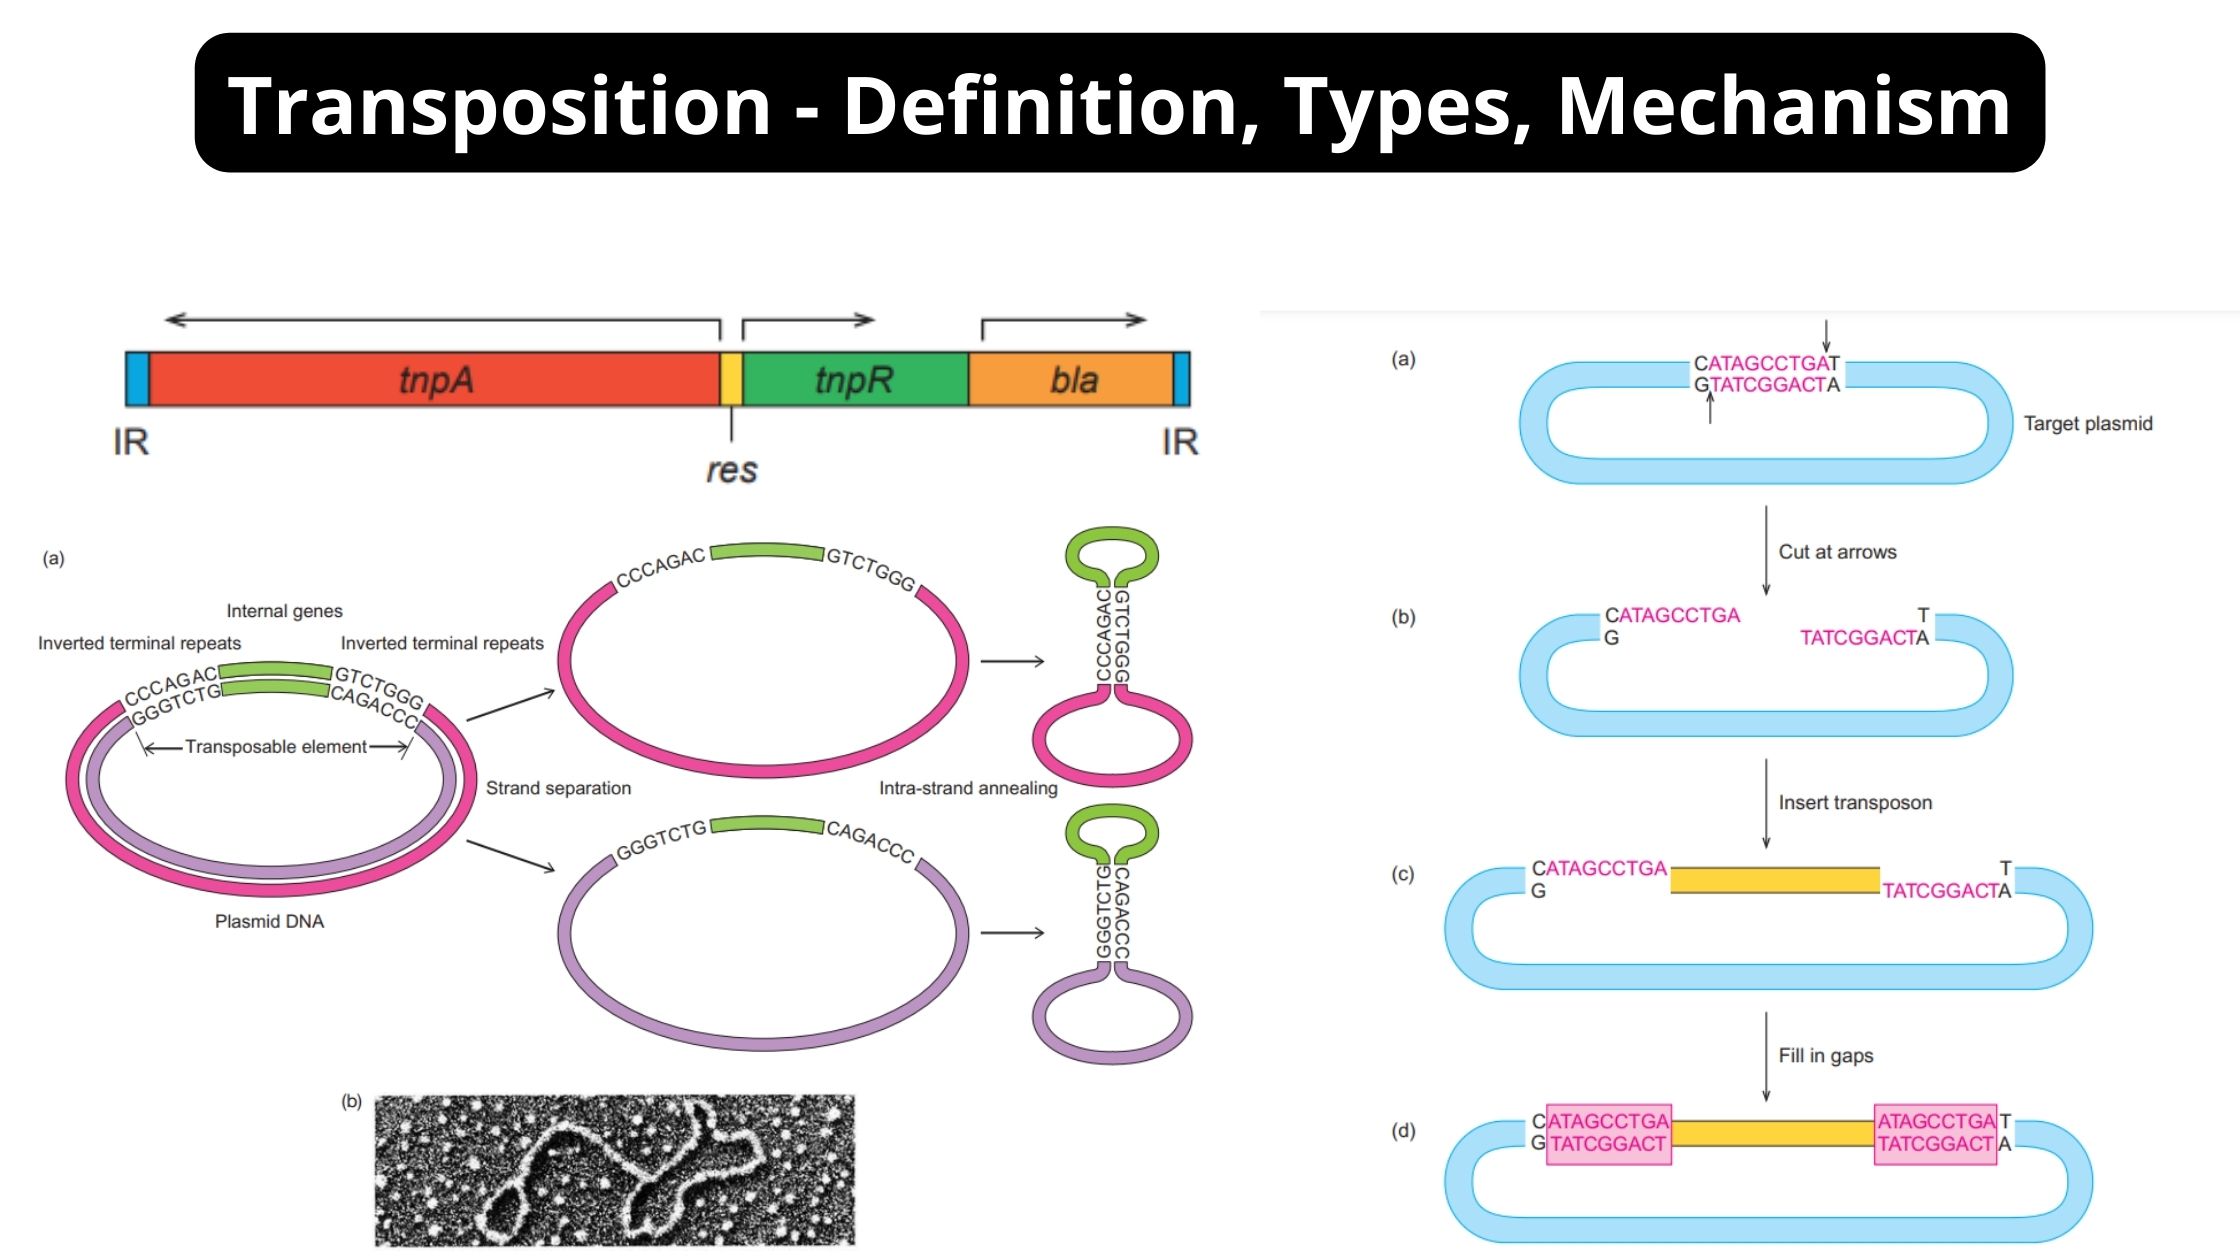 Transposition - Definition, Types, Mechanism